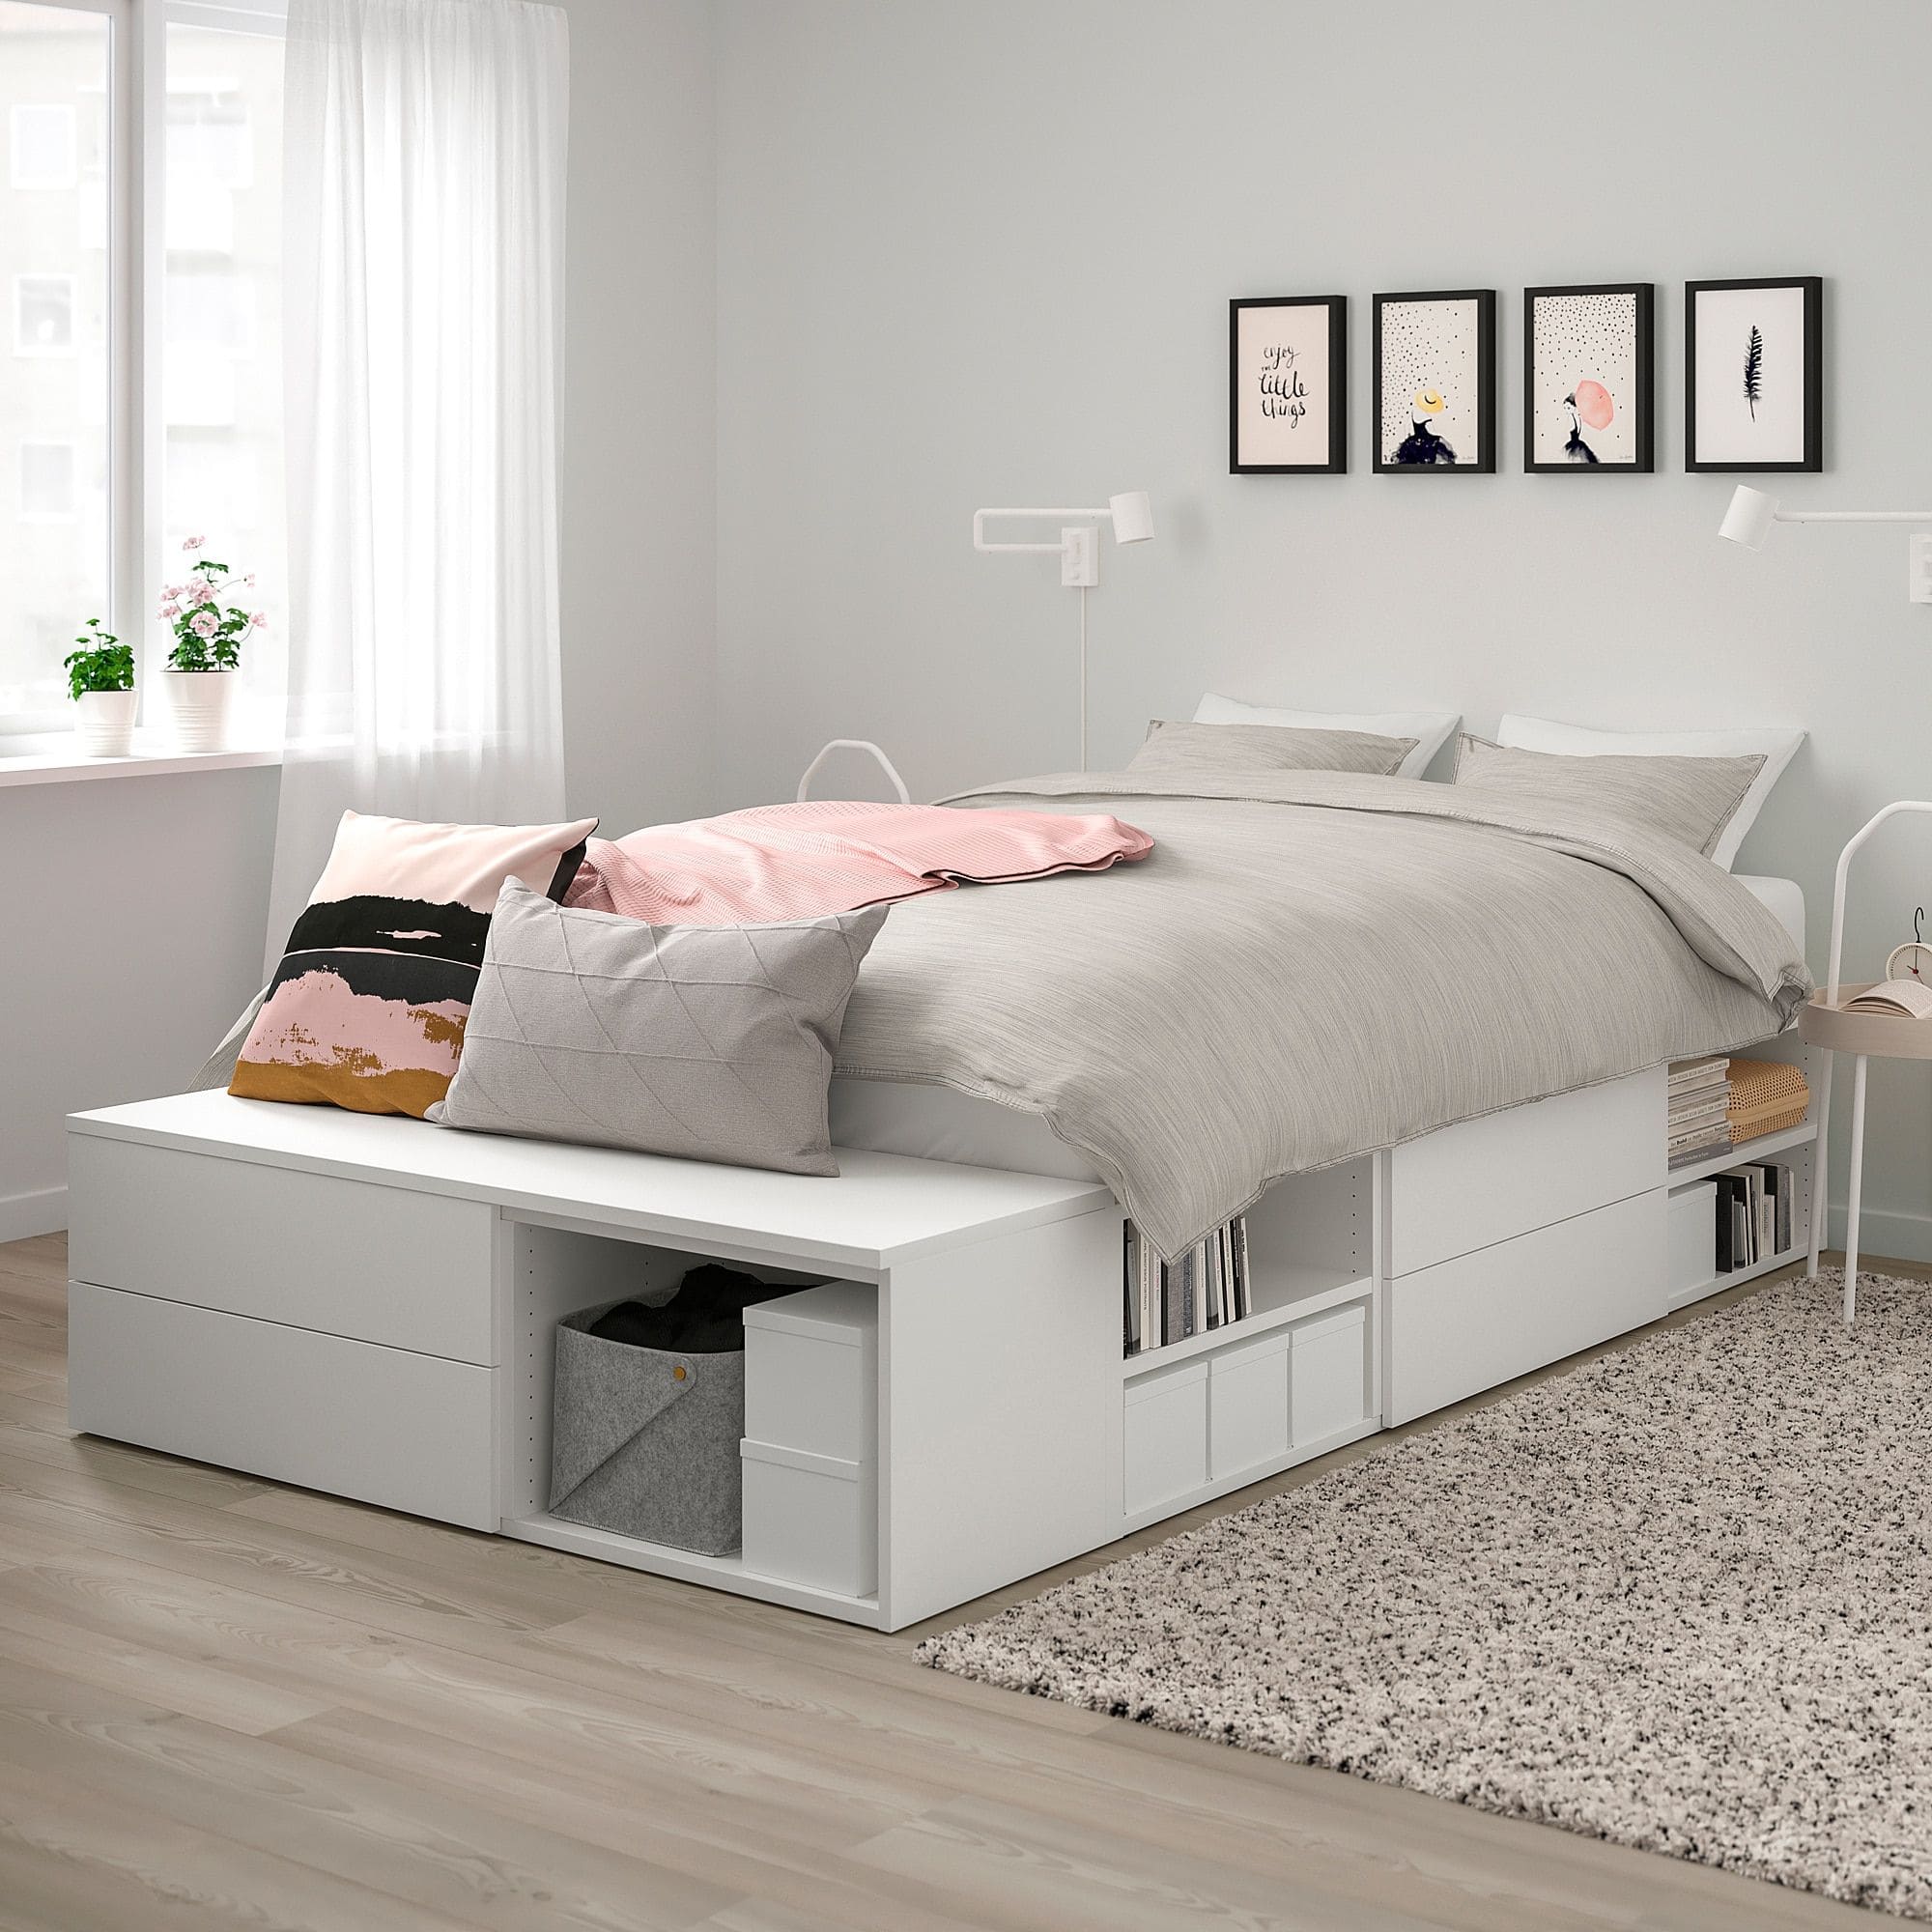 23 creative storage bed ideas to add to your bag - 155